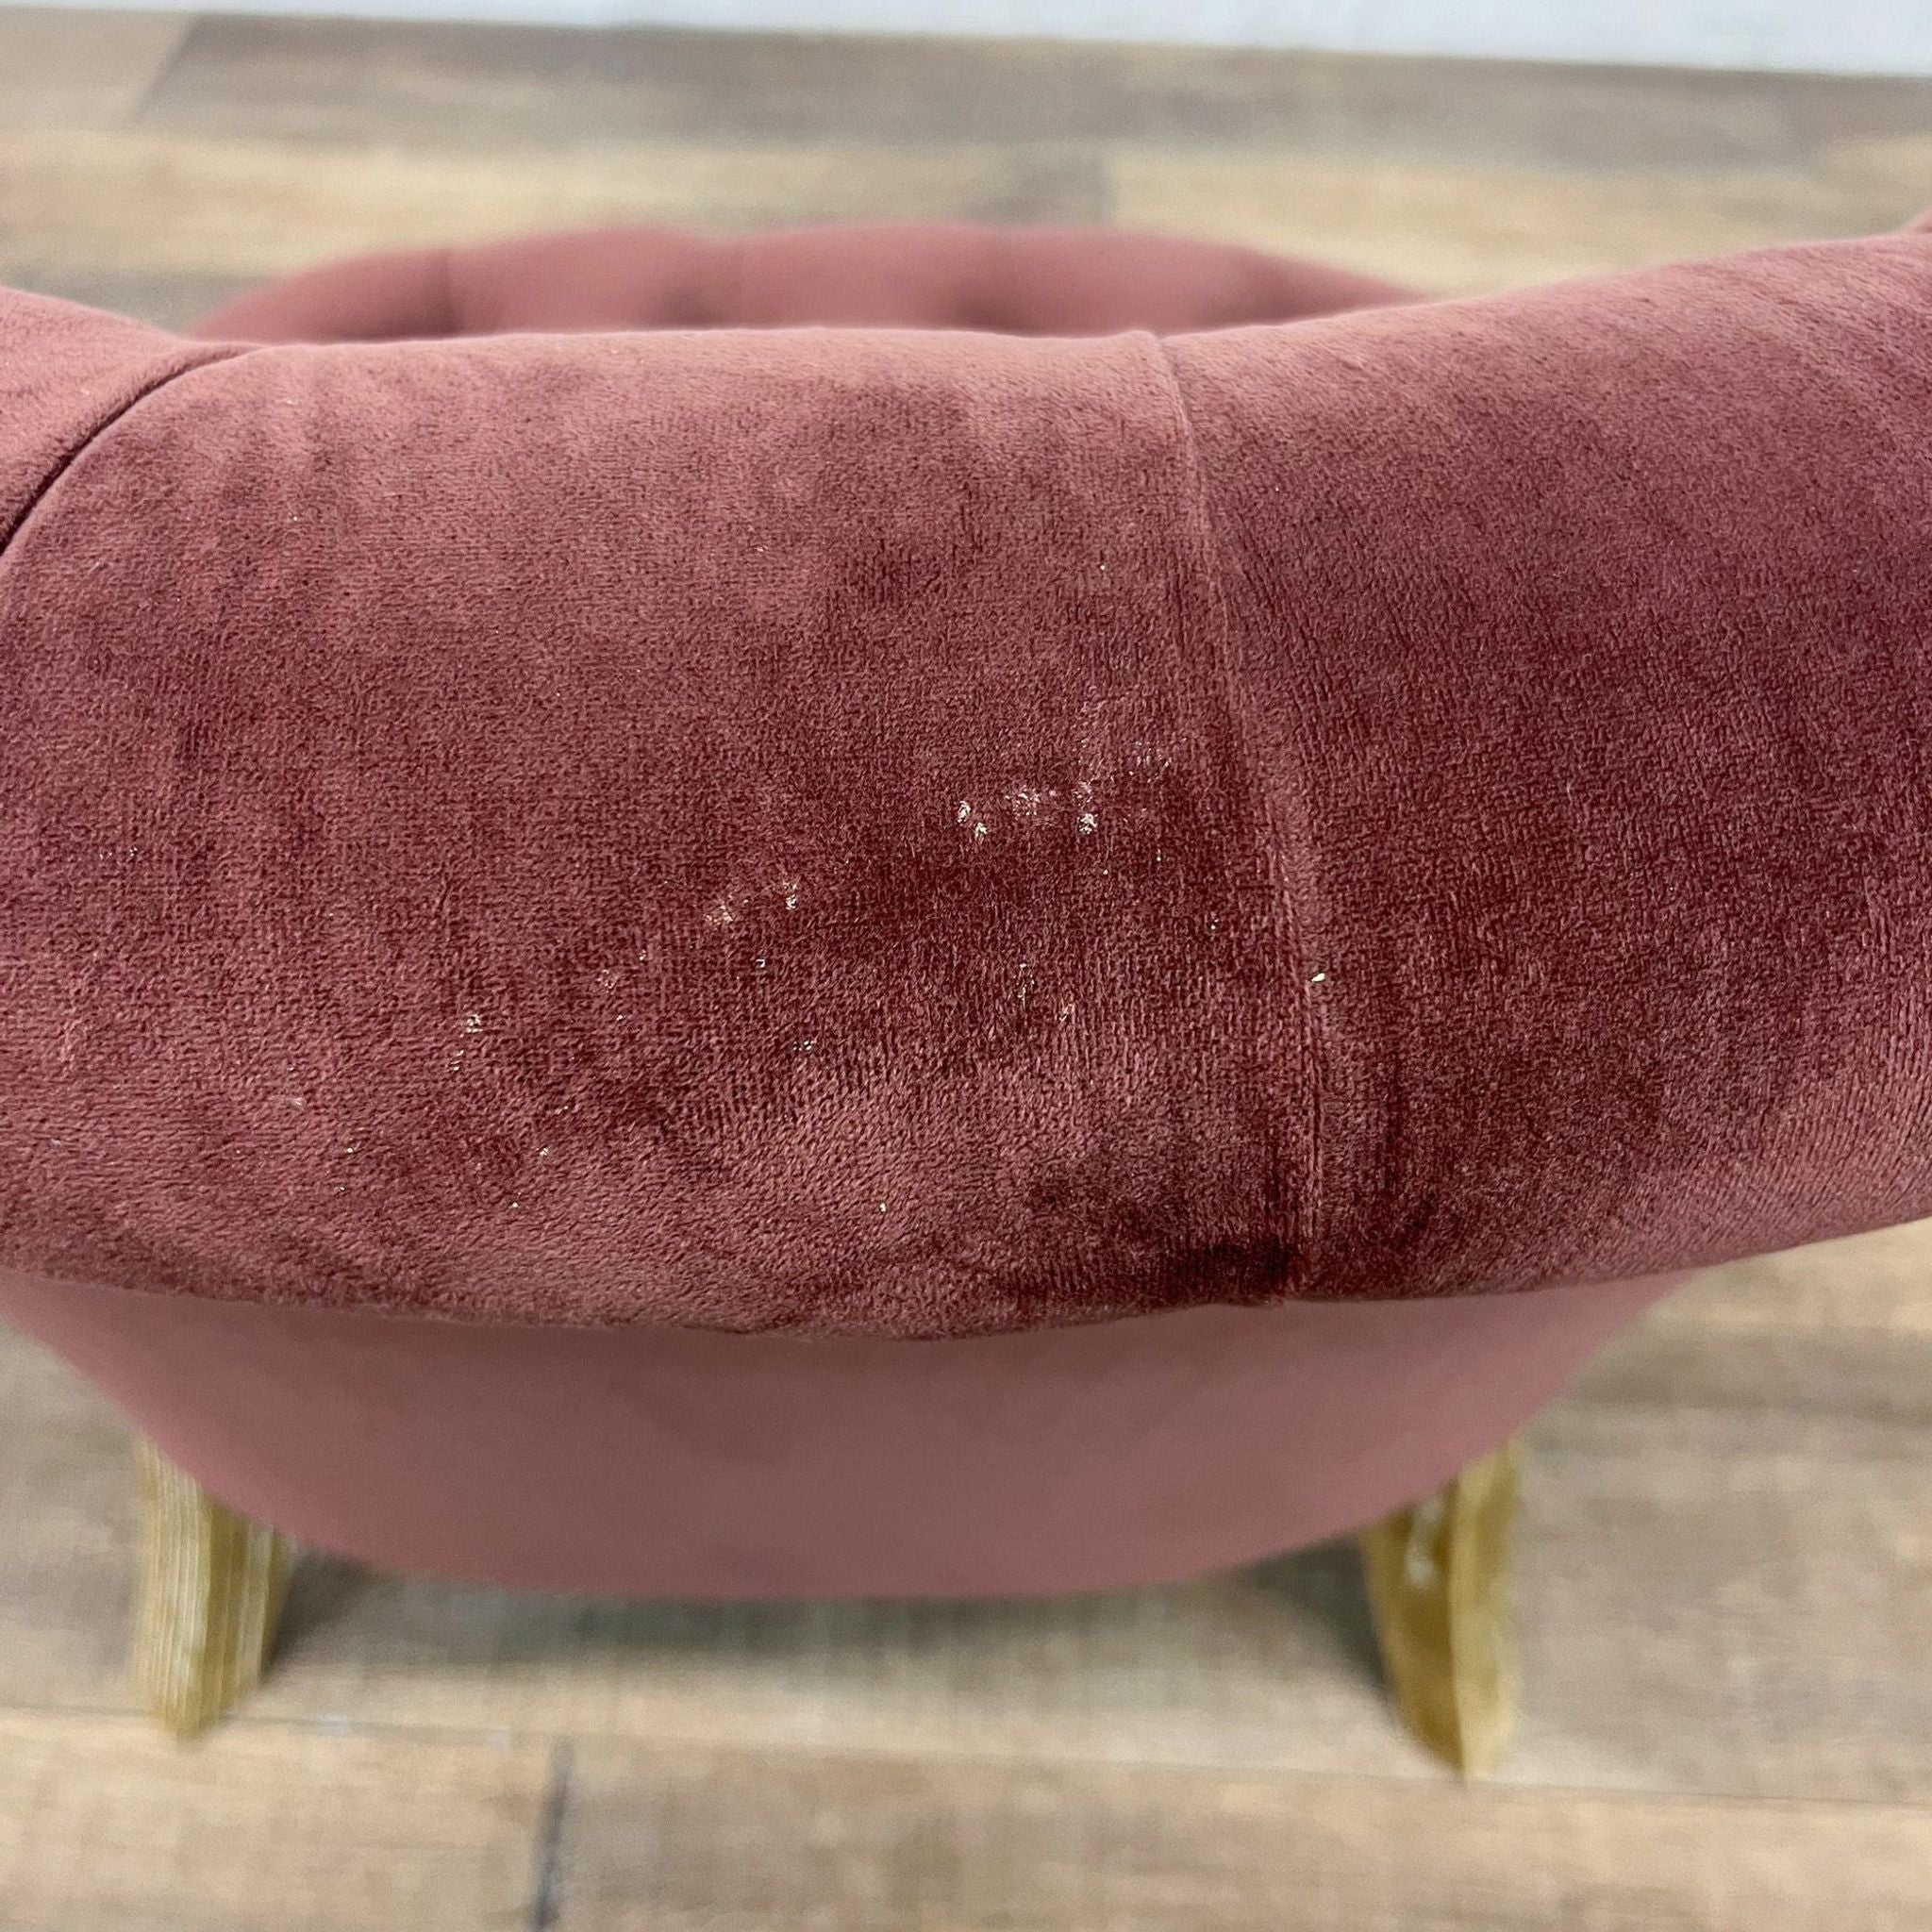 Cost Plus accent chair with curved tufted velvet upholstery and wooden turned legs with casters, in a dusty rose color.